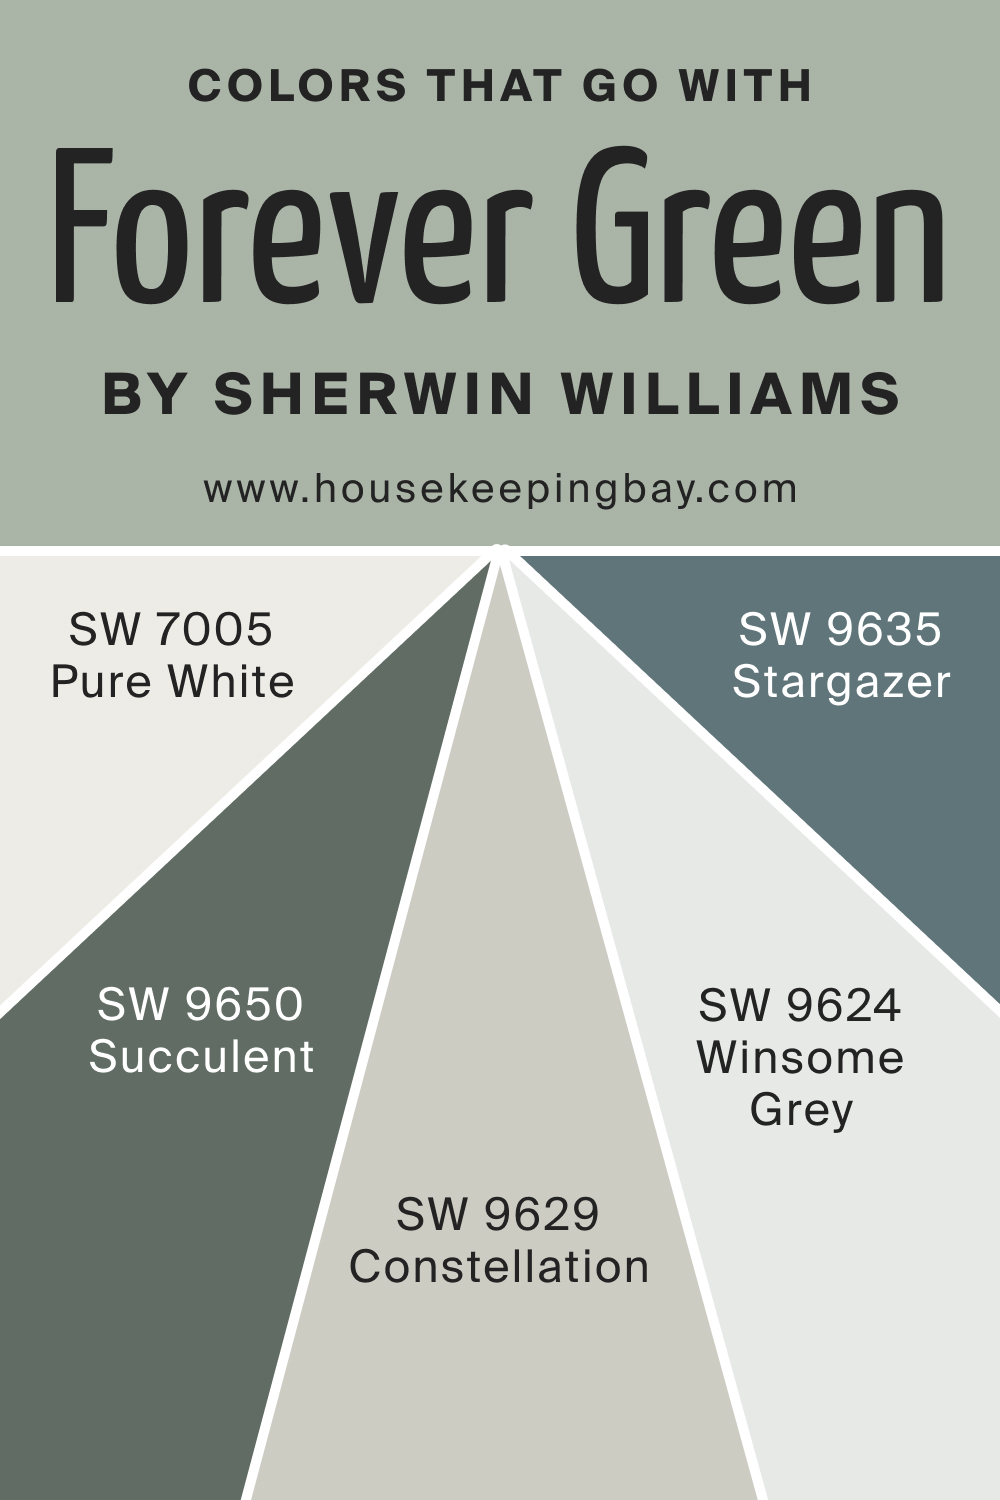 Colors that goes with SW 9653 Forever Green by Sherwin Williams